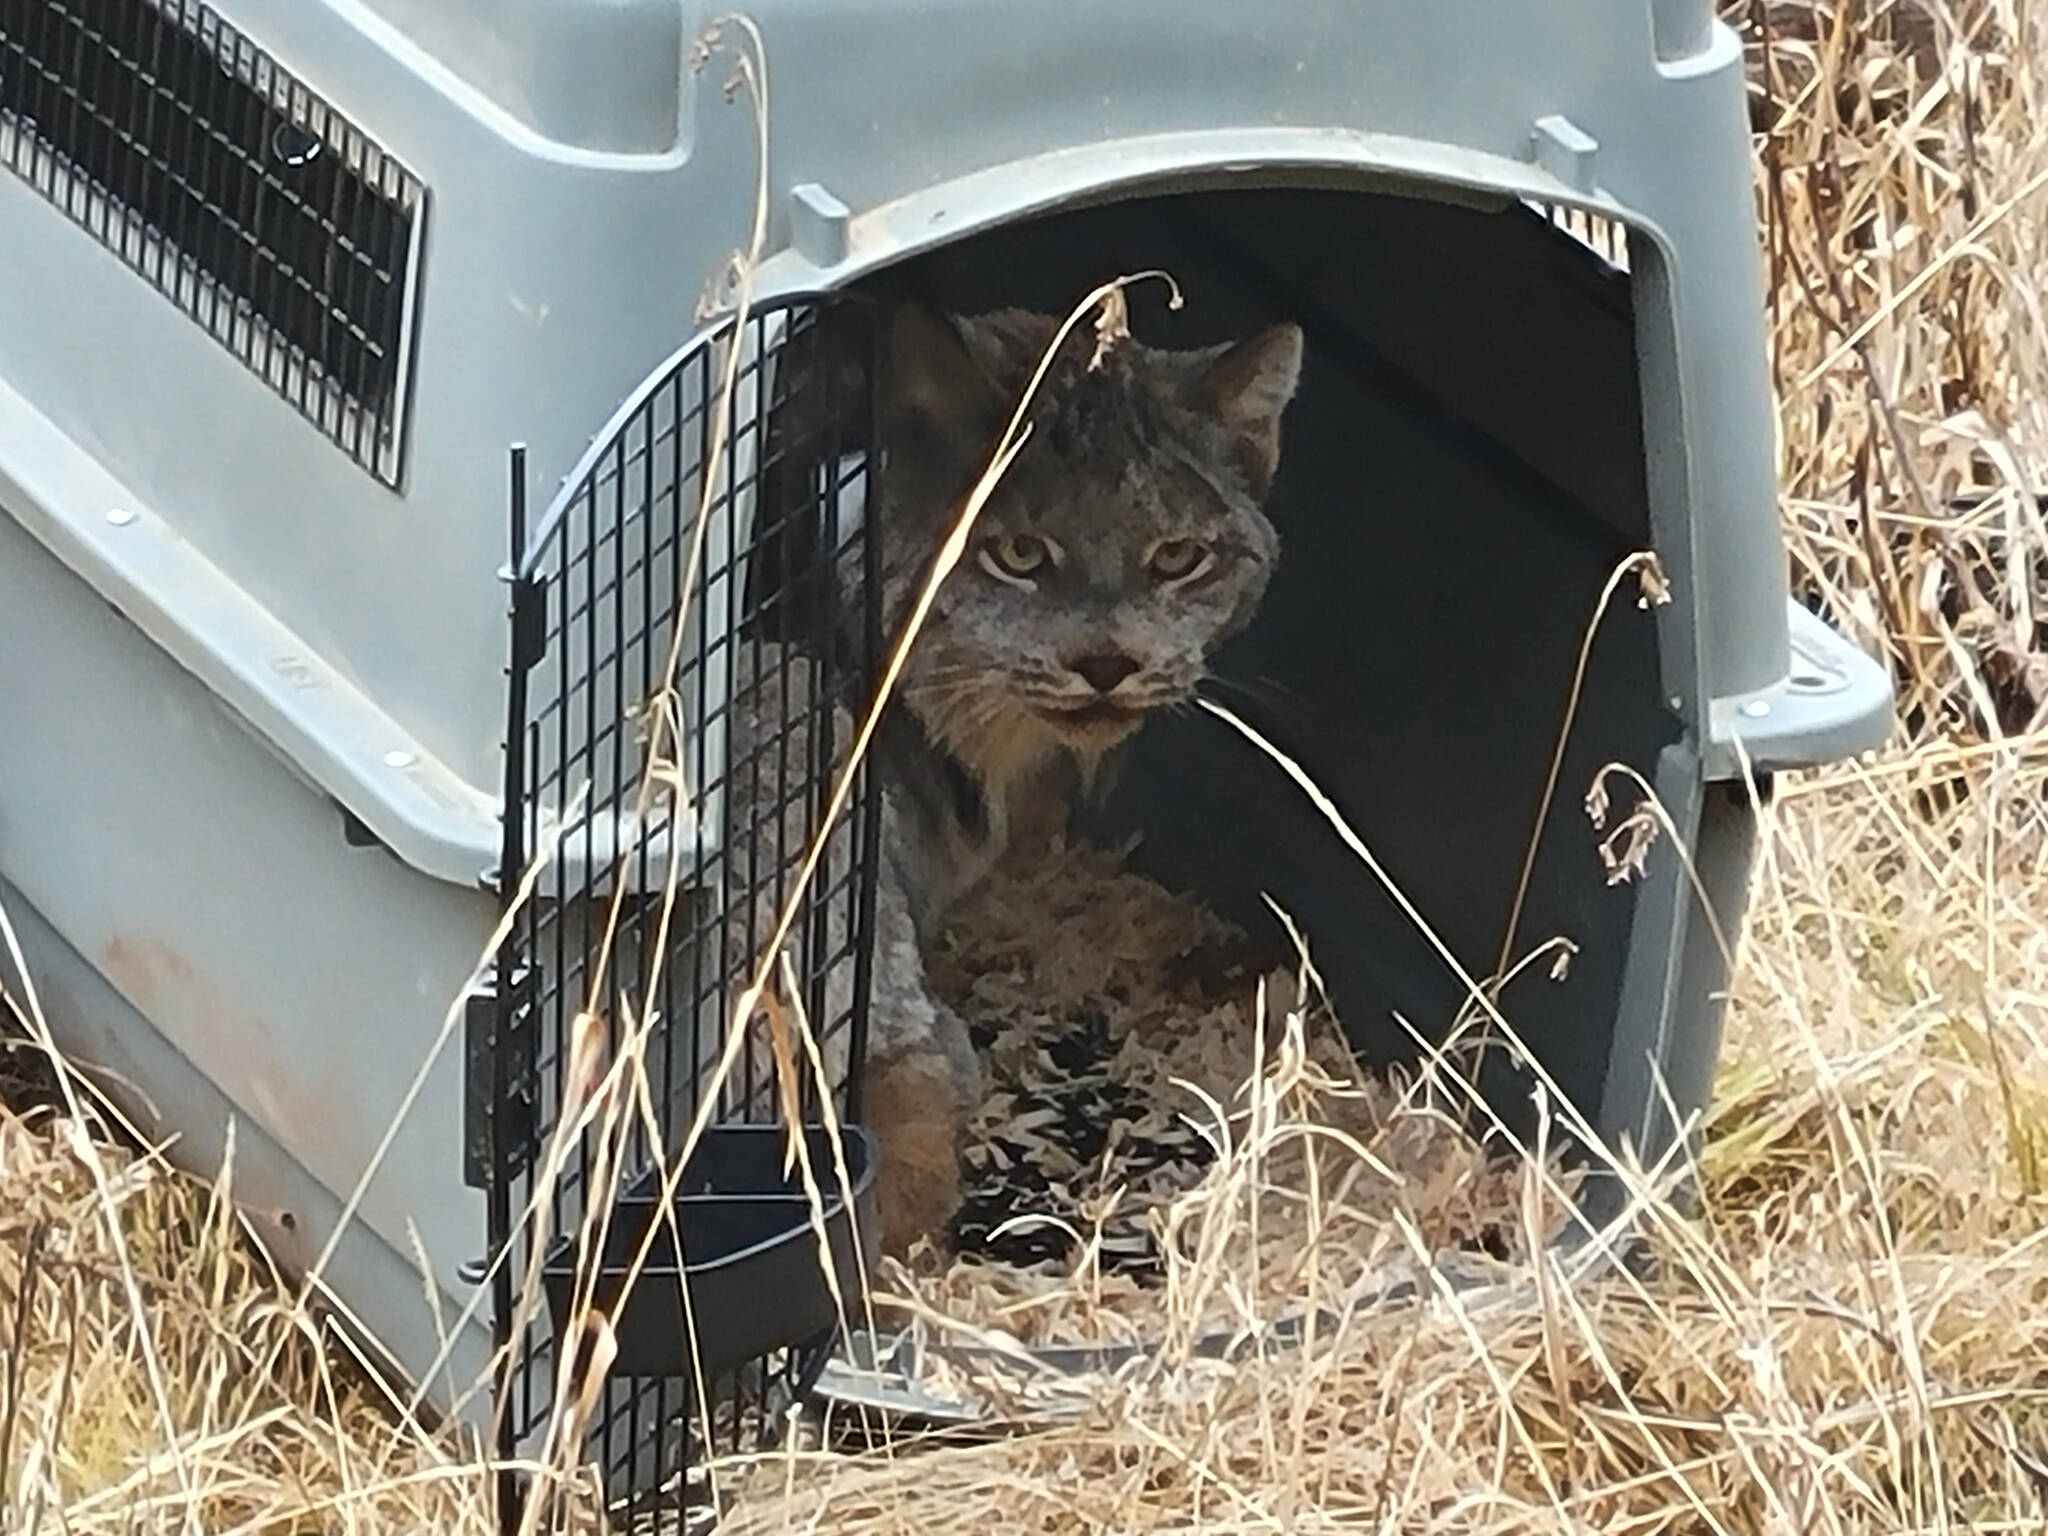 A lynx is transported in an ordinary pet carrier. It will be released onto the Colville Reservation after being relocated from BC, Canada. This is part of a program to reintroduce the lynx to the area.